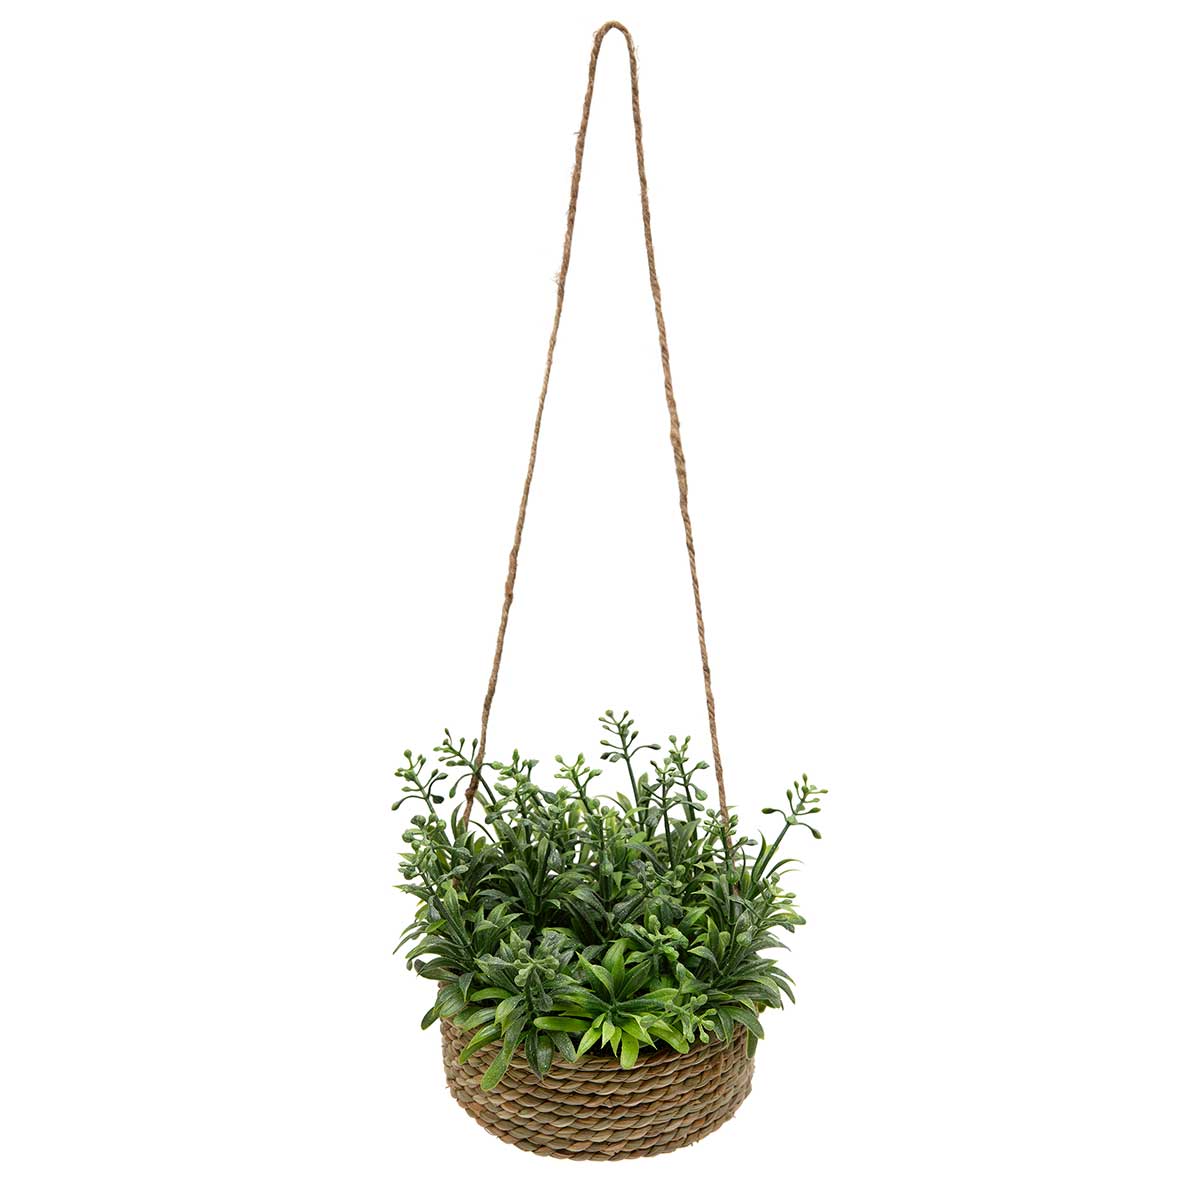 SAGE IN BASKET 6IN X 5IN WITH TWINE HANGER - Click Image to Close